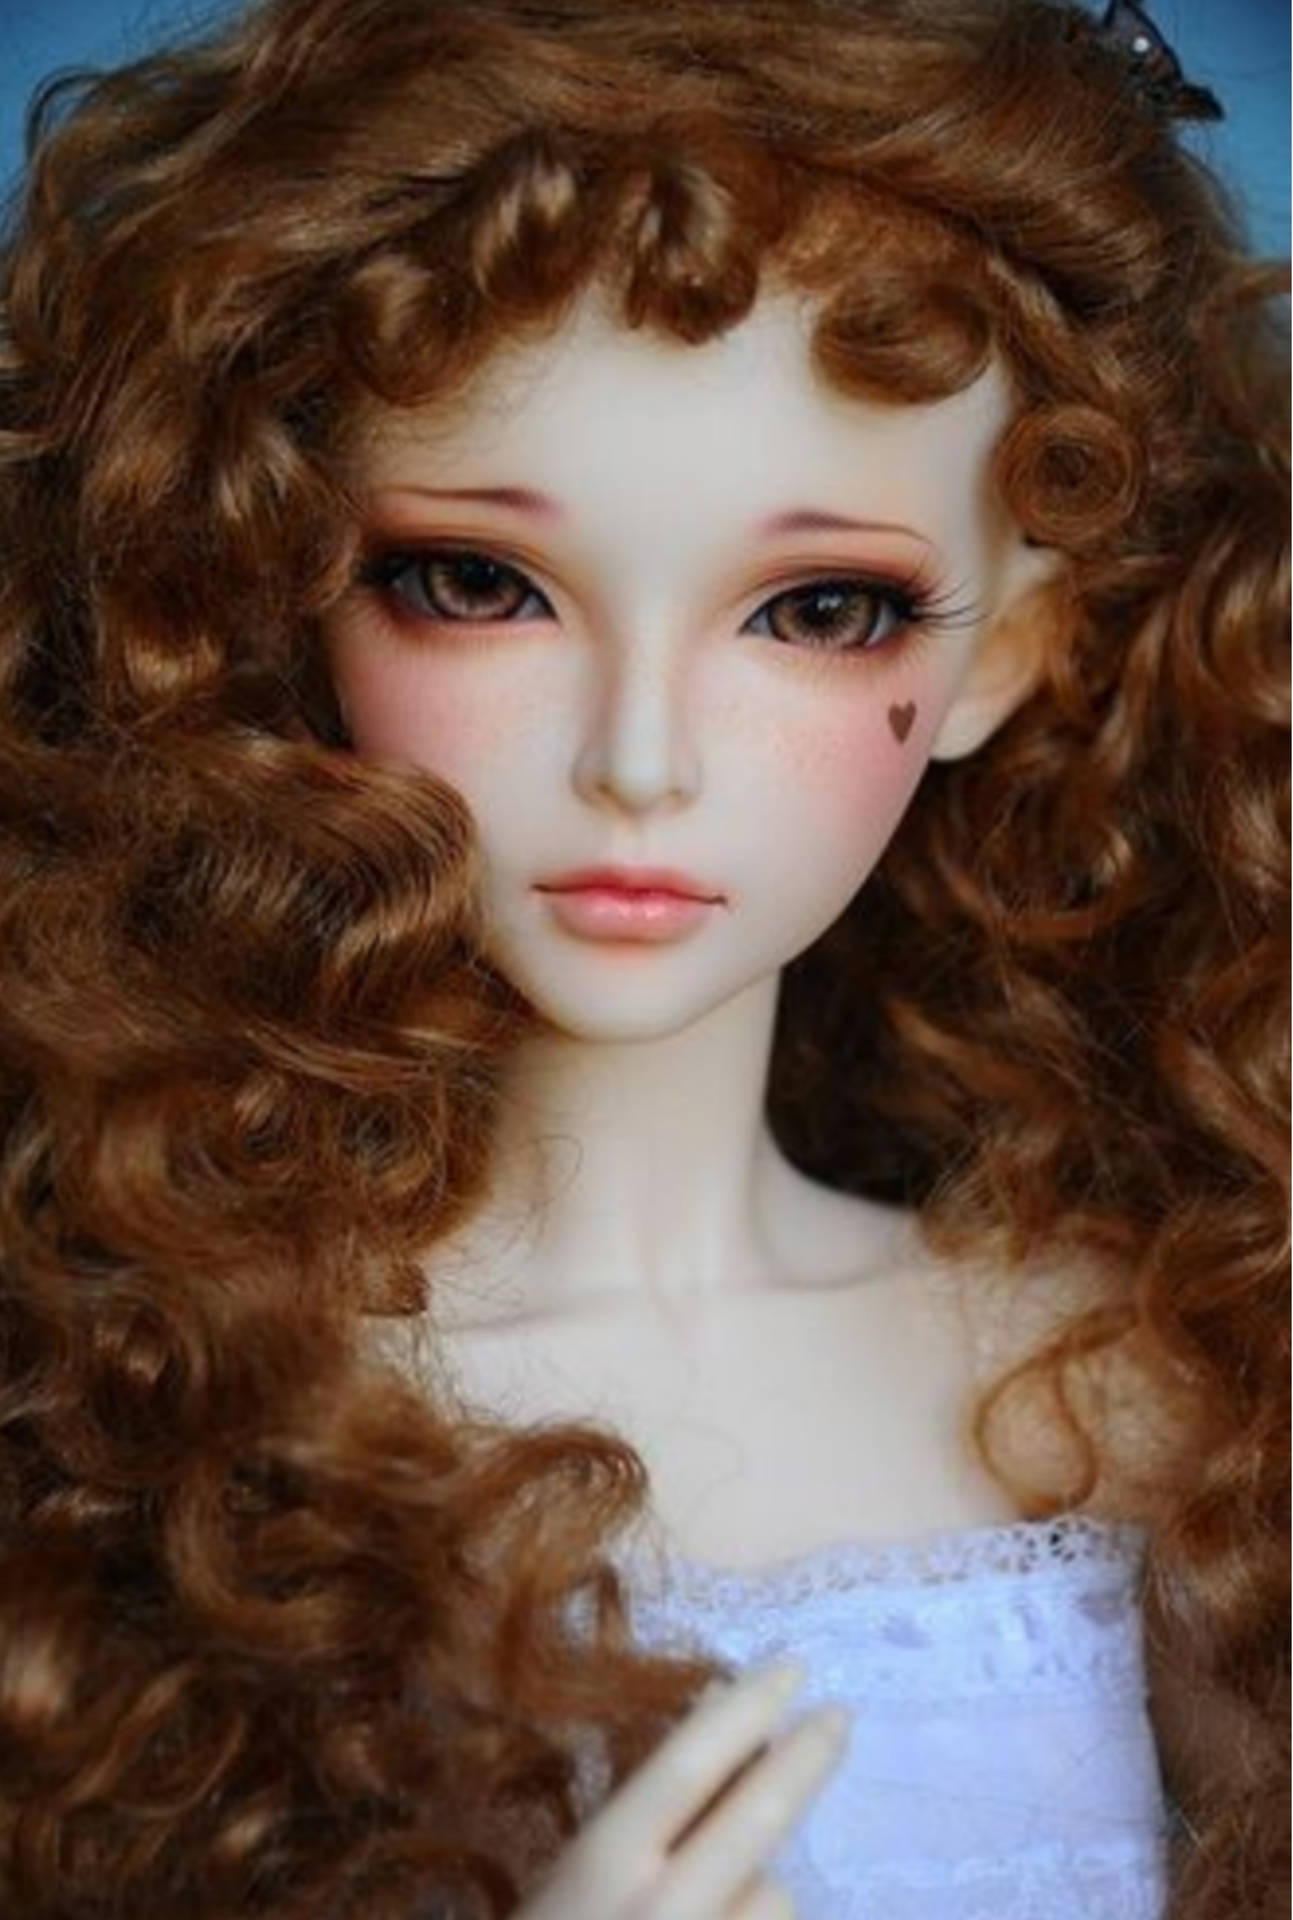 Barbie Doll With Cute Curly Hair Wallpaper